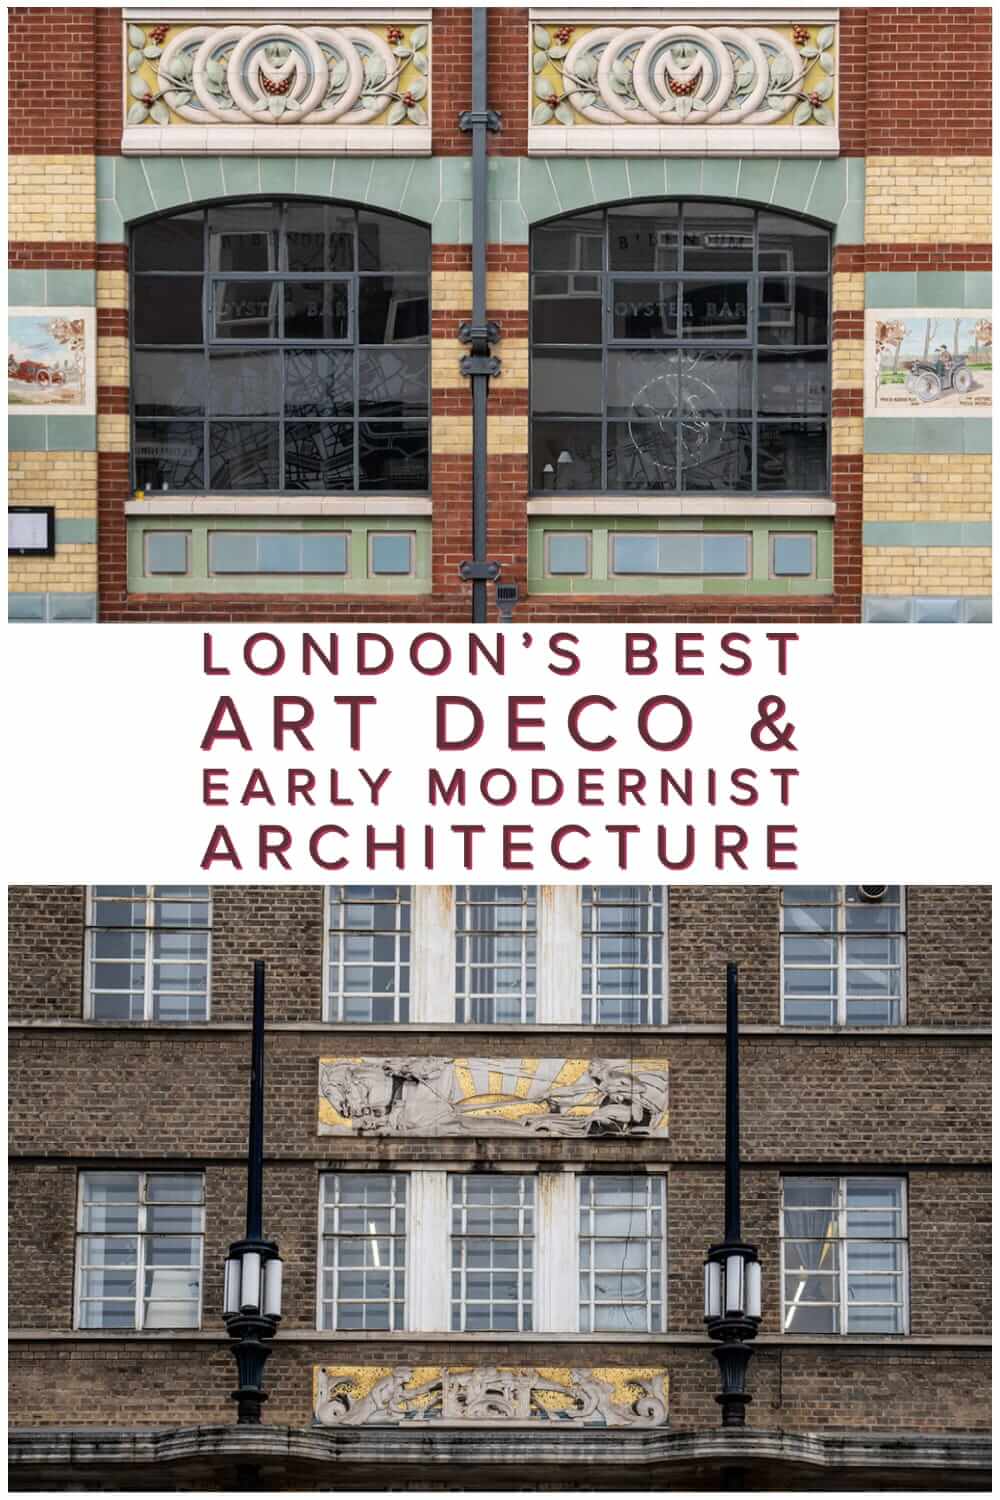 Photographs of London’s best Art Deco and early modernist architecture, a distinctive style that took off in Britain in the 1920s and 1930s #England #UK #ArtDeco